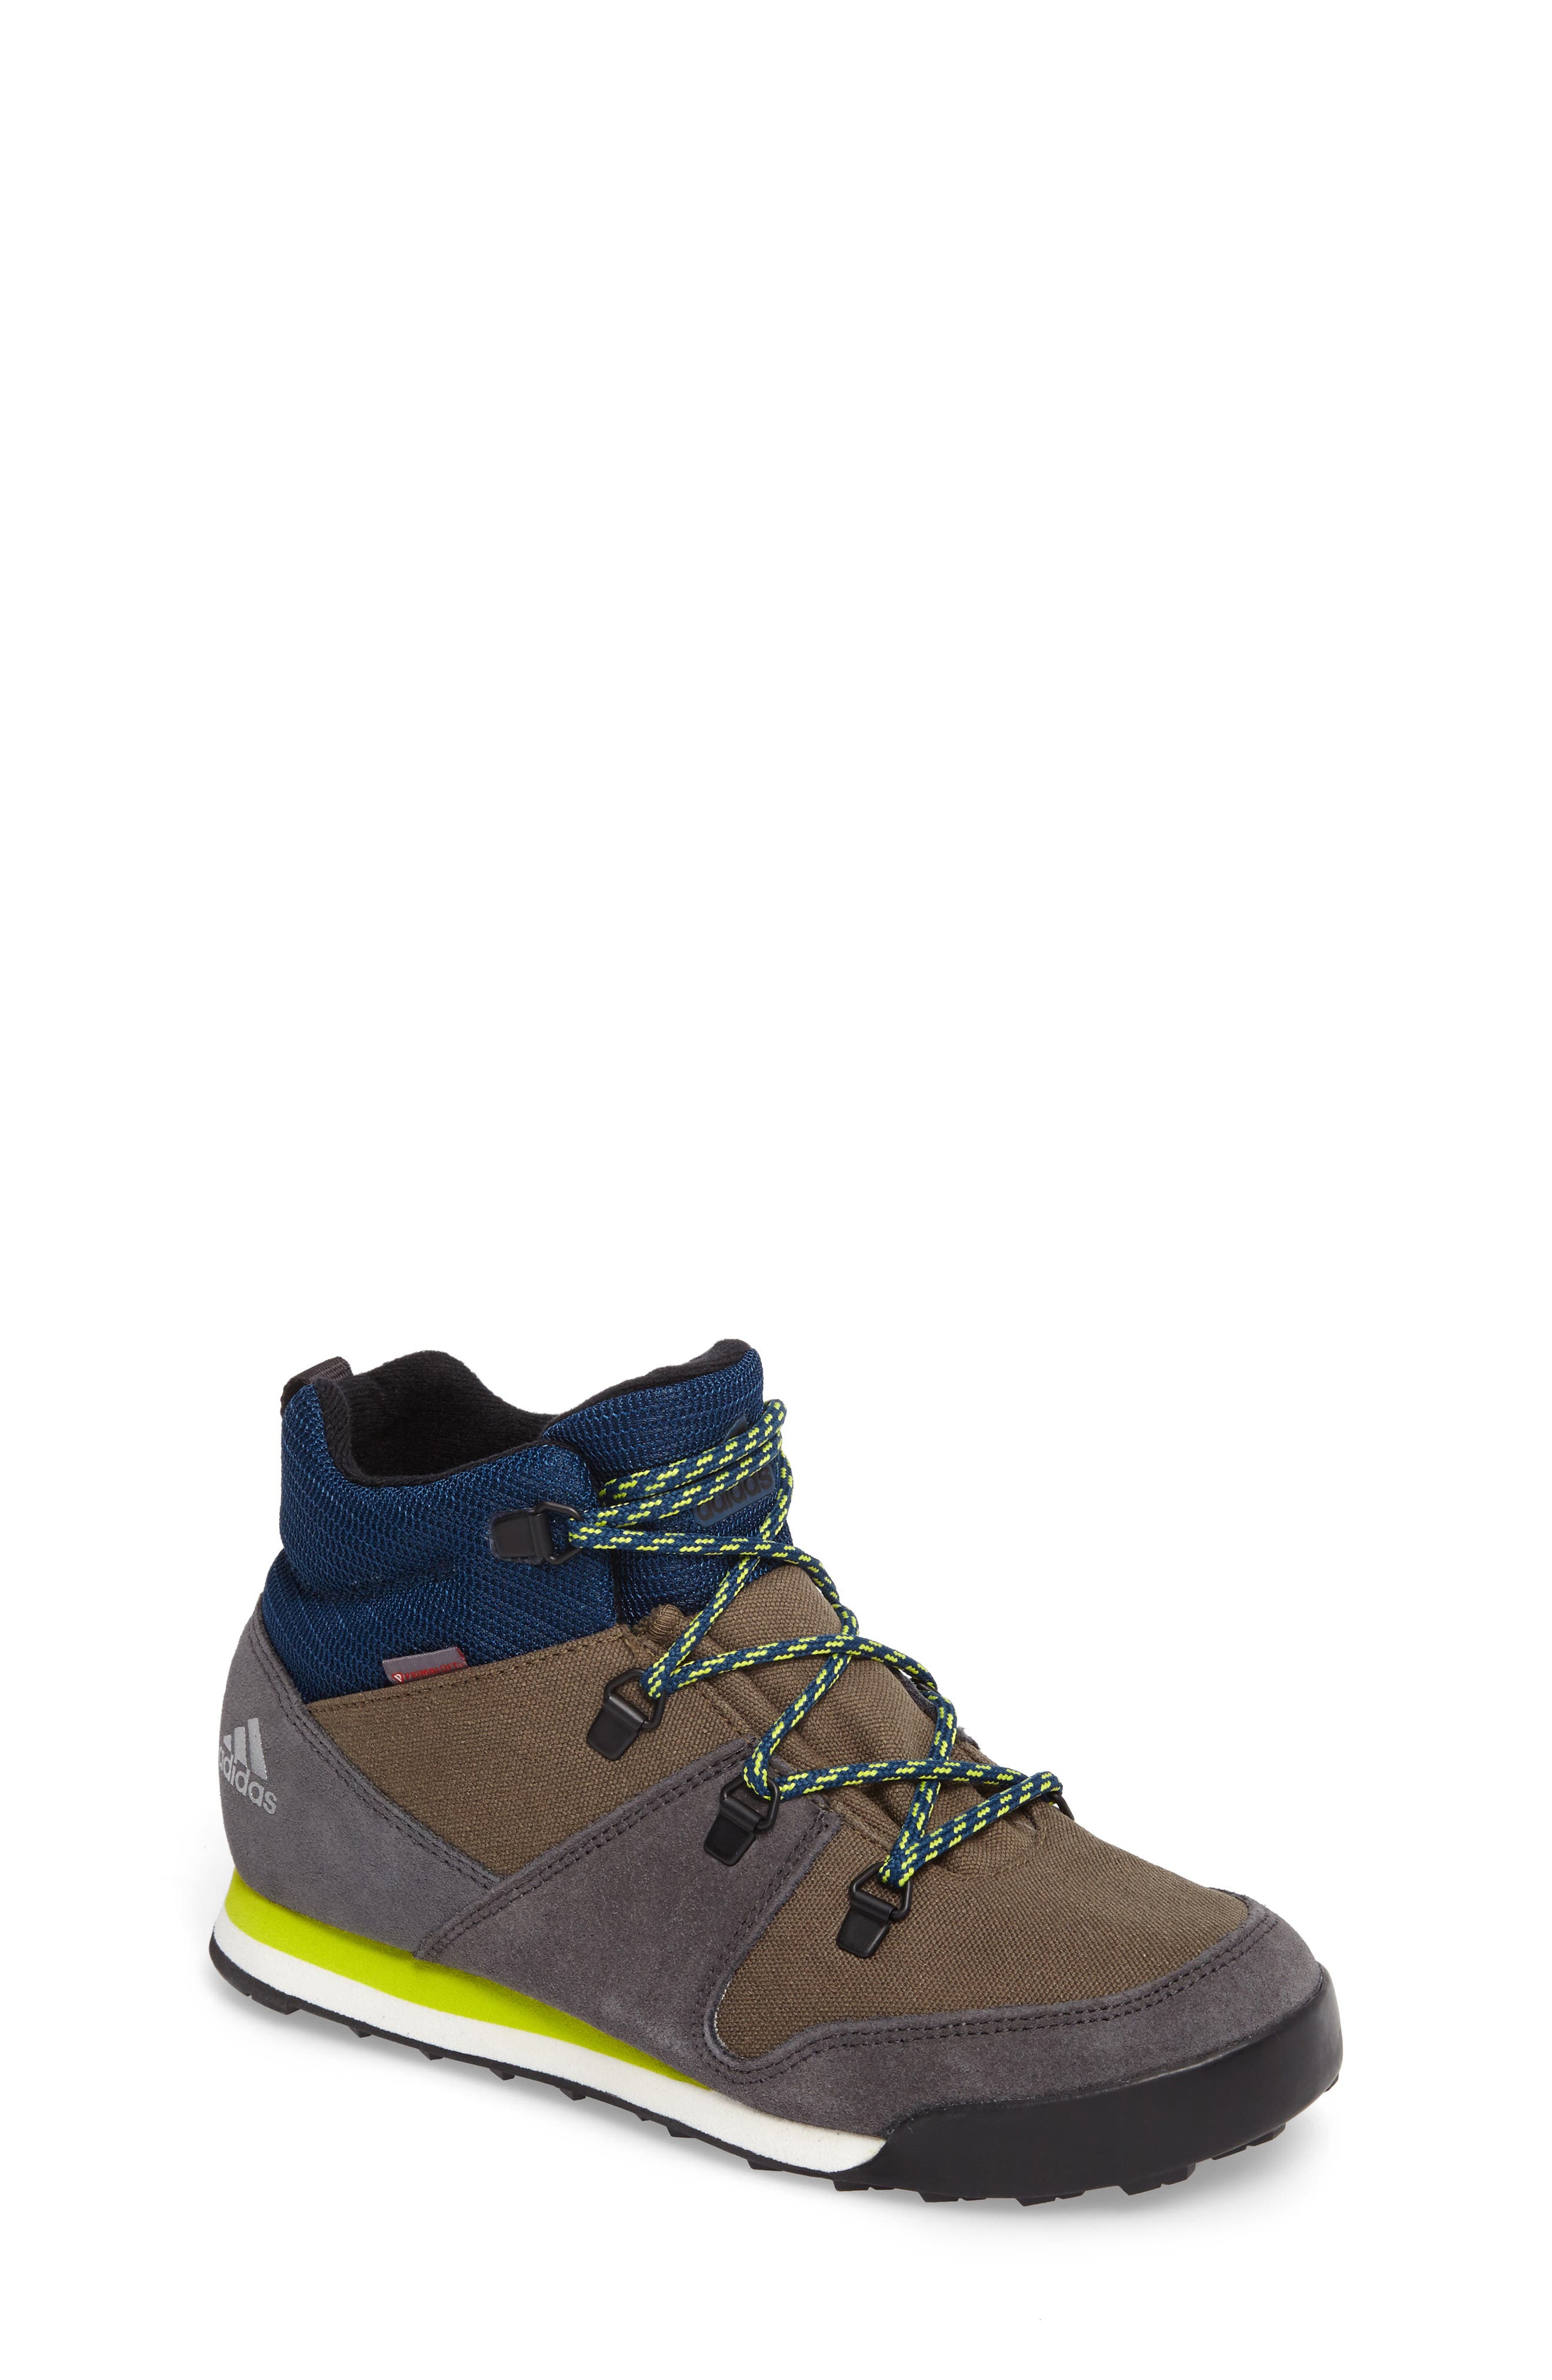 Snowpitch Insulated Sneaker Boot 